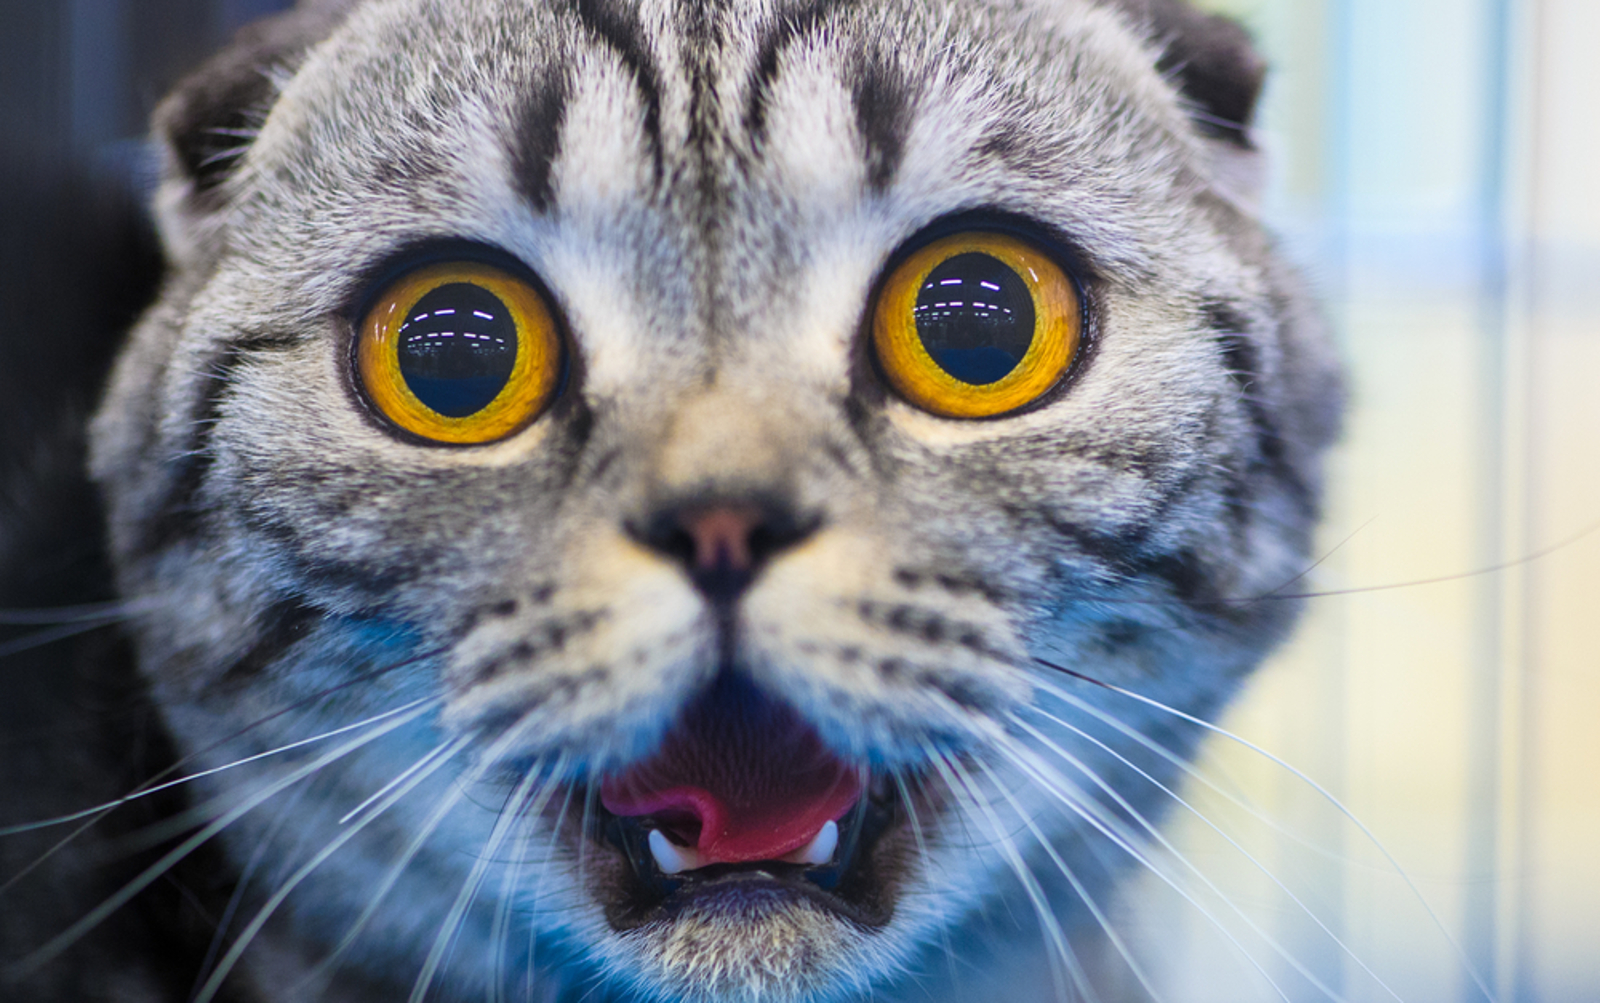 Think Cats Getting Brain Freeze is Funny? Here's Why You Probably Shouldn't